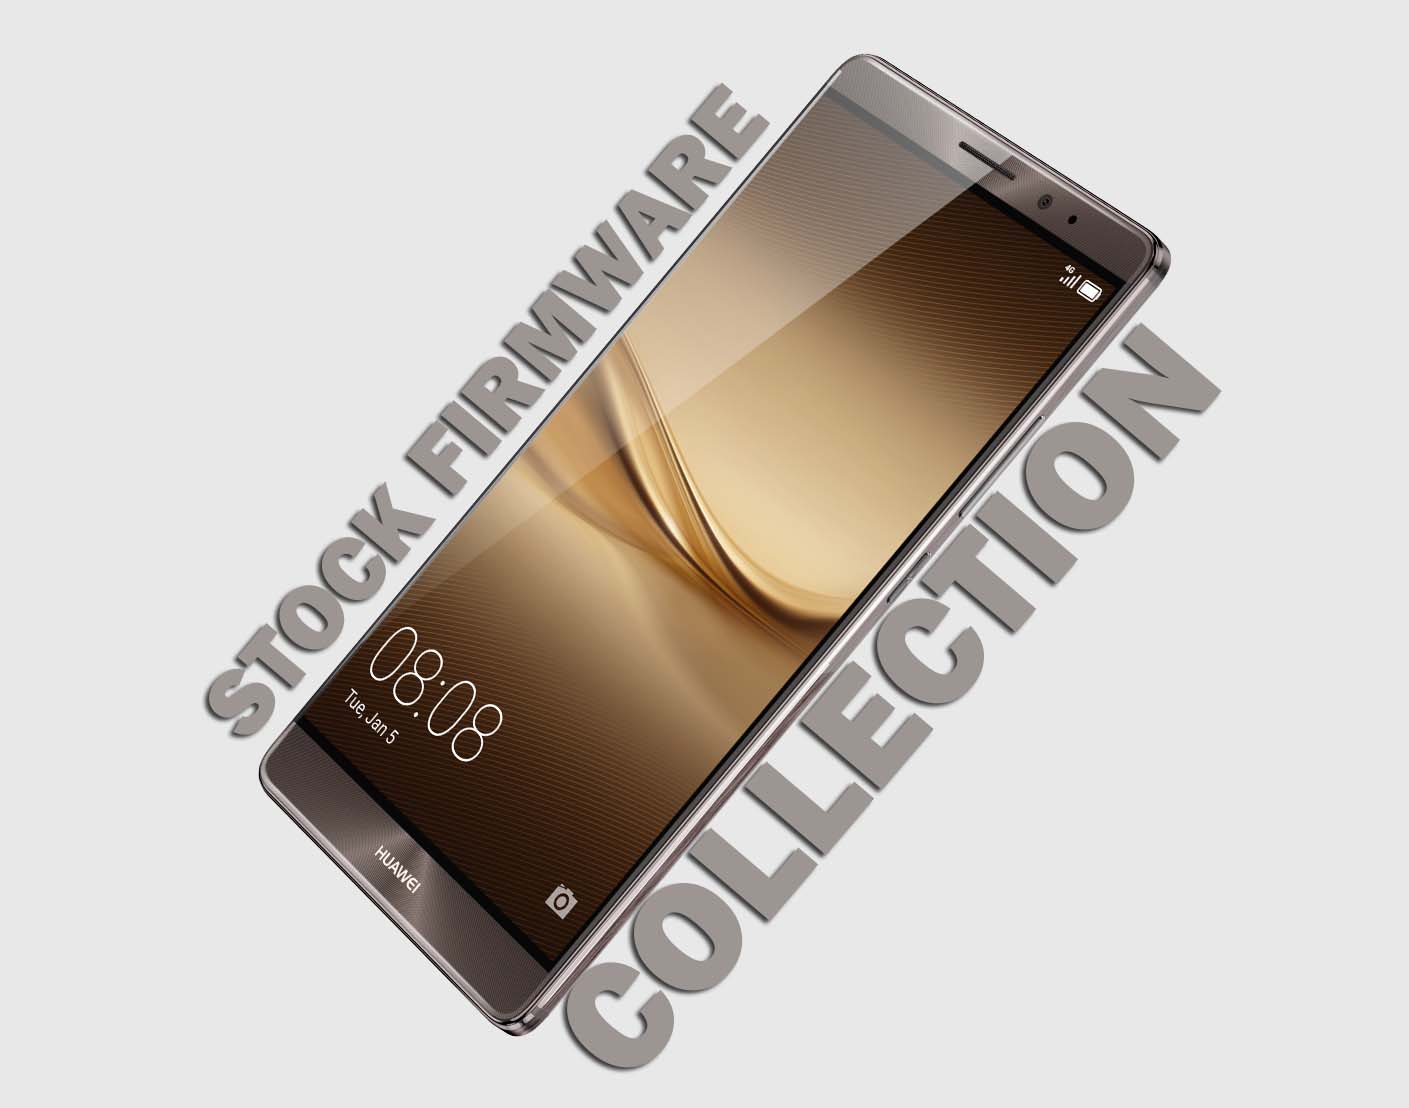 Raad Maria Mos Huawei Mate 8 Stock Firmware Collections [Back to Stock ROM]